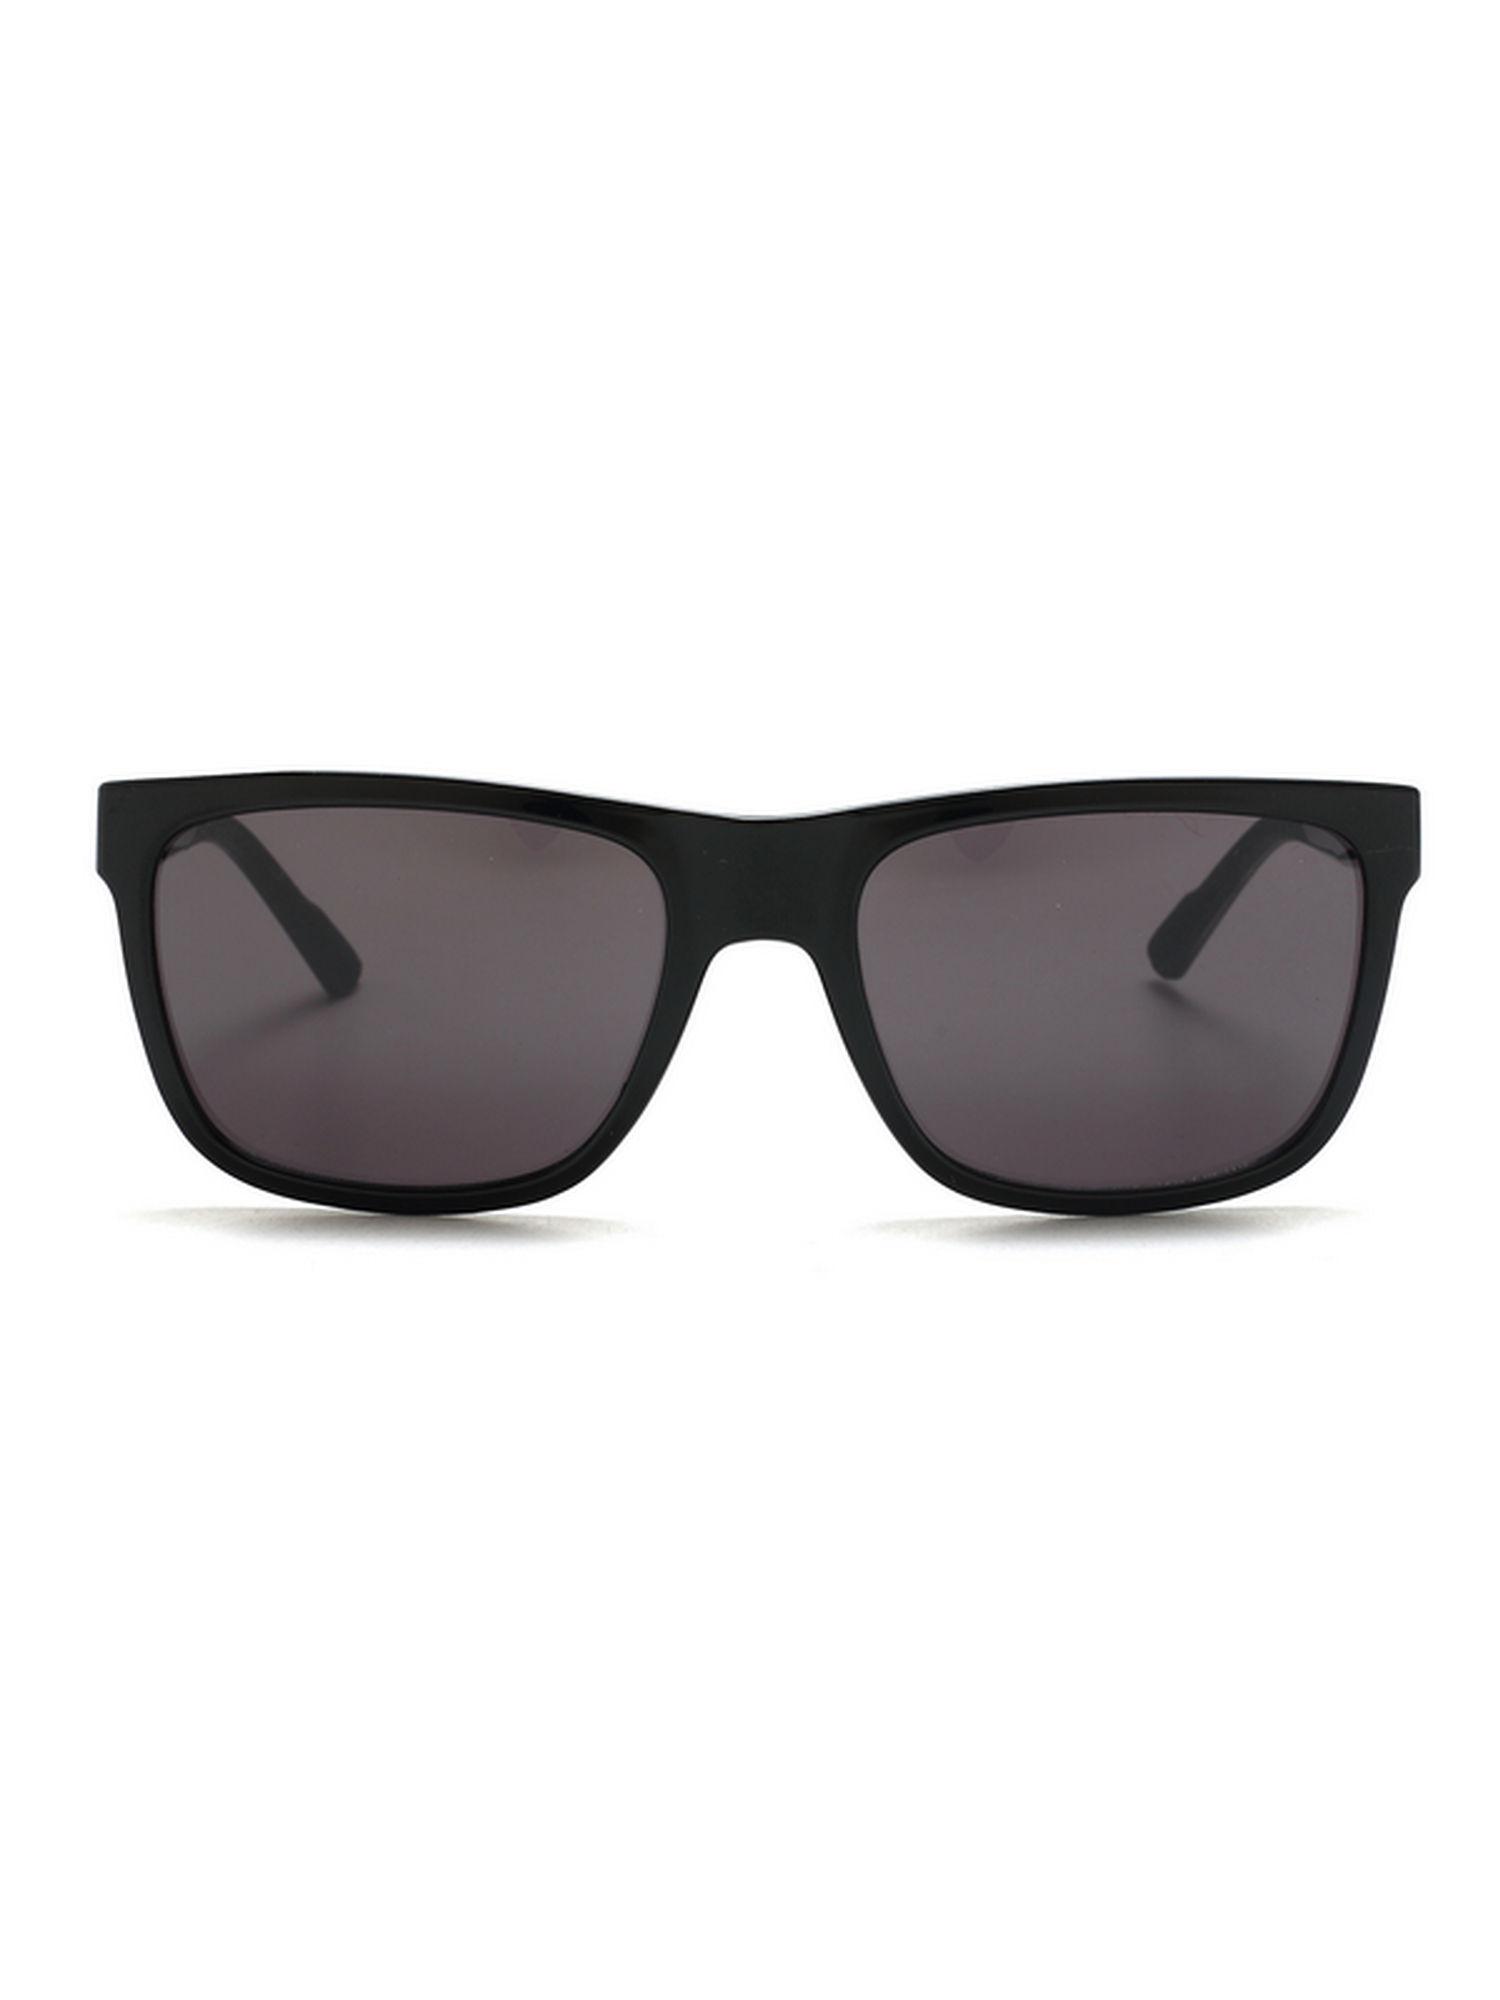 black-lens-rectangle-sunglass-black-frame-with-uv-protected---ck-21531-001-58-s